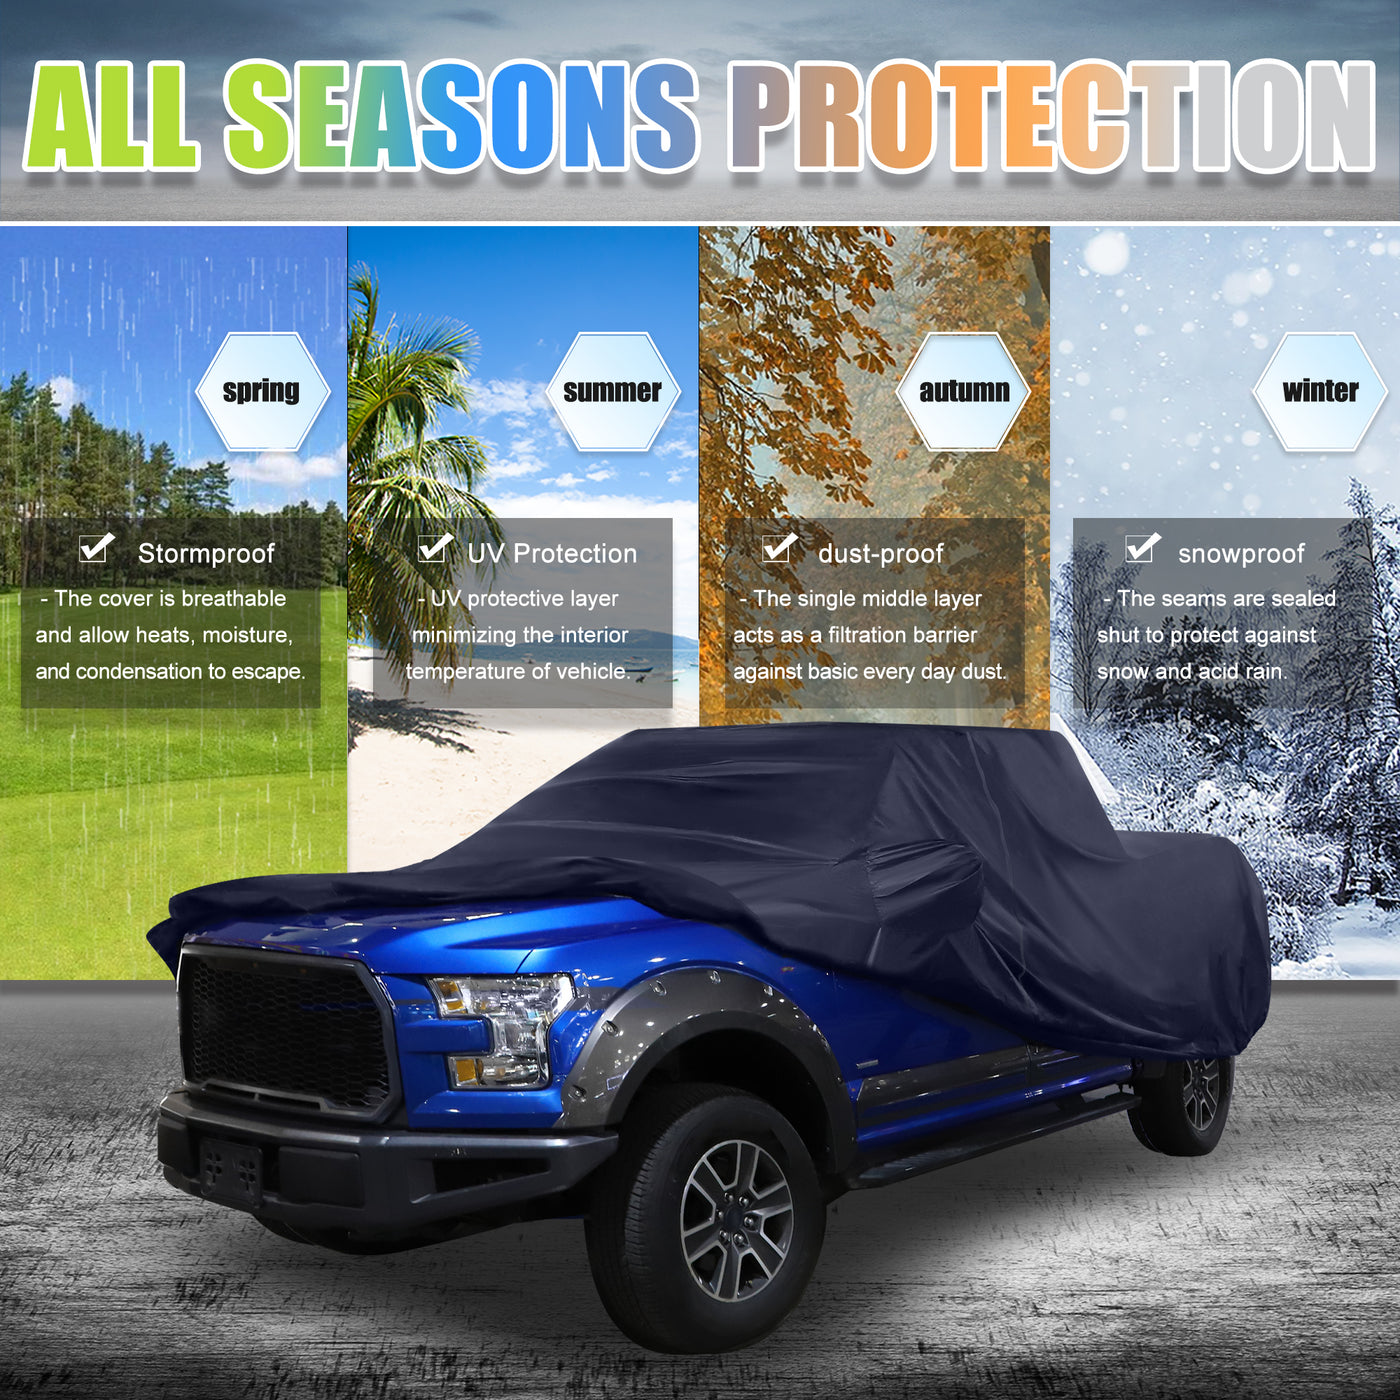 X AUTOHAUX Pickup Truck Cover for Ford F150 Crew Cab Pickup 4 Door 6.5 Feet Bed 2004-2021 Sun Rain Dust Wind Snow Protection 190T PU W/ Driver Door Zipper